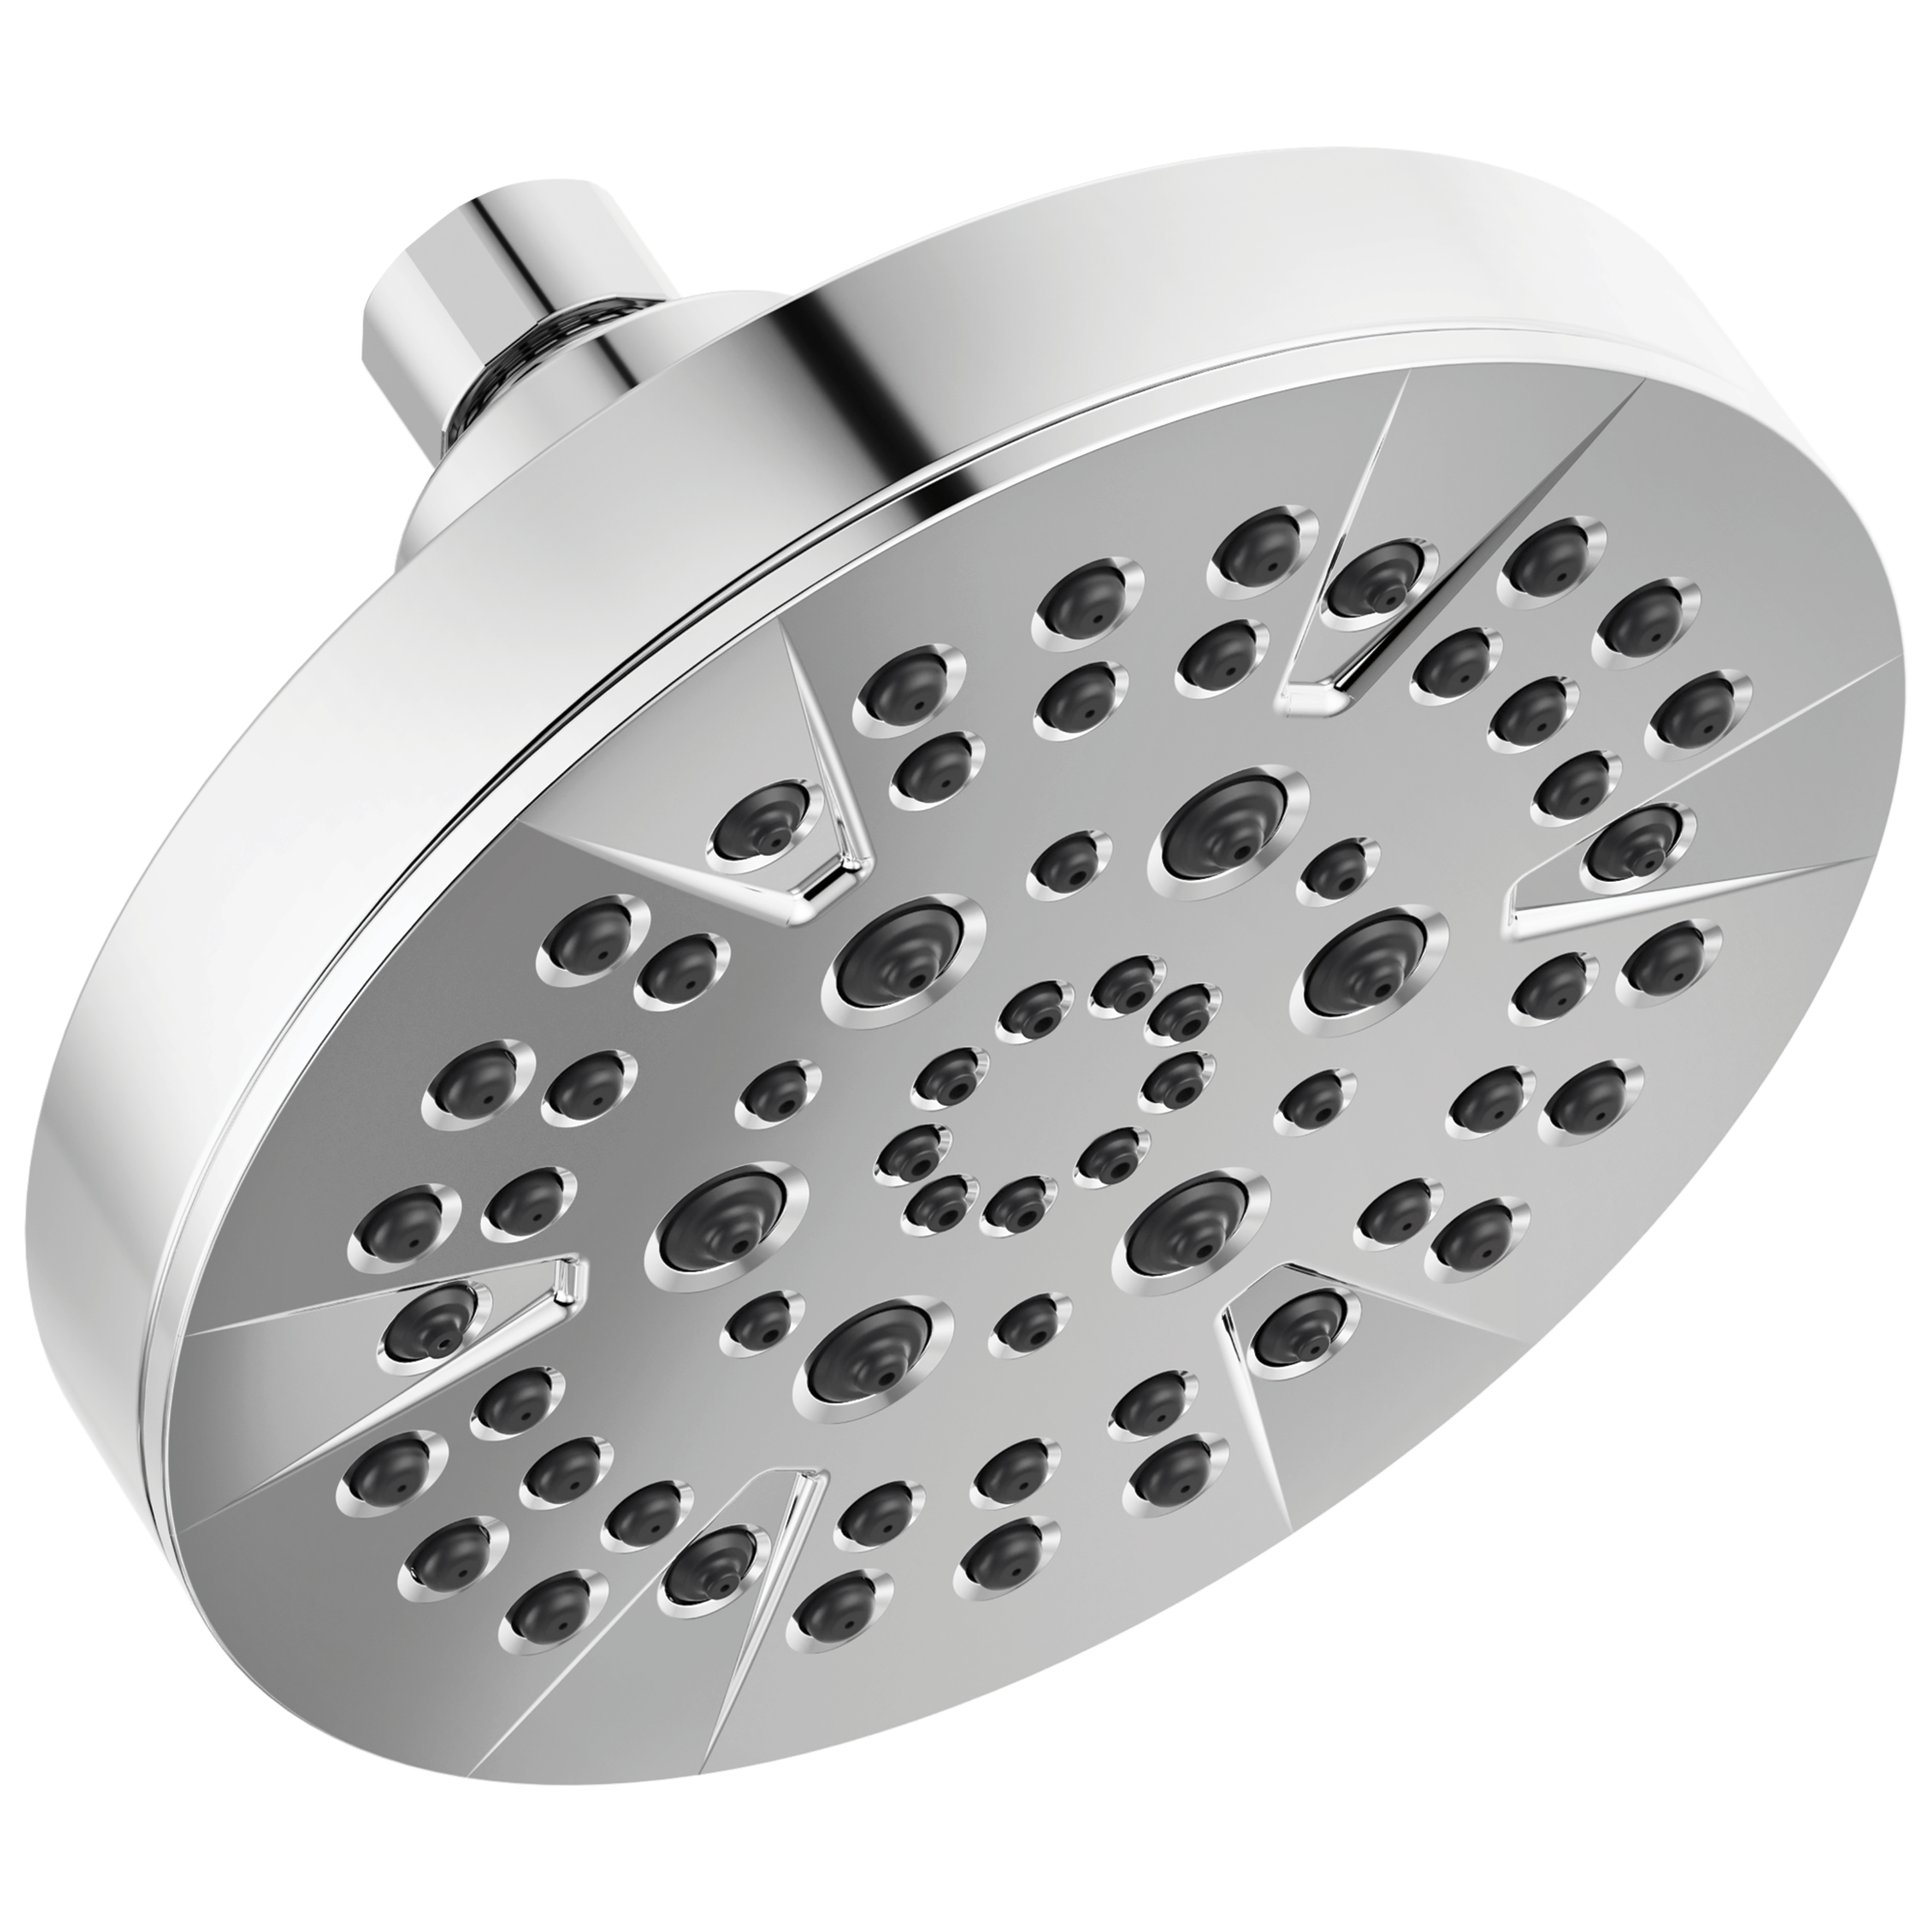 6-Setting Hand Shower with Cleaning Spray in Spotshield Brushed Nickel  75720SN